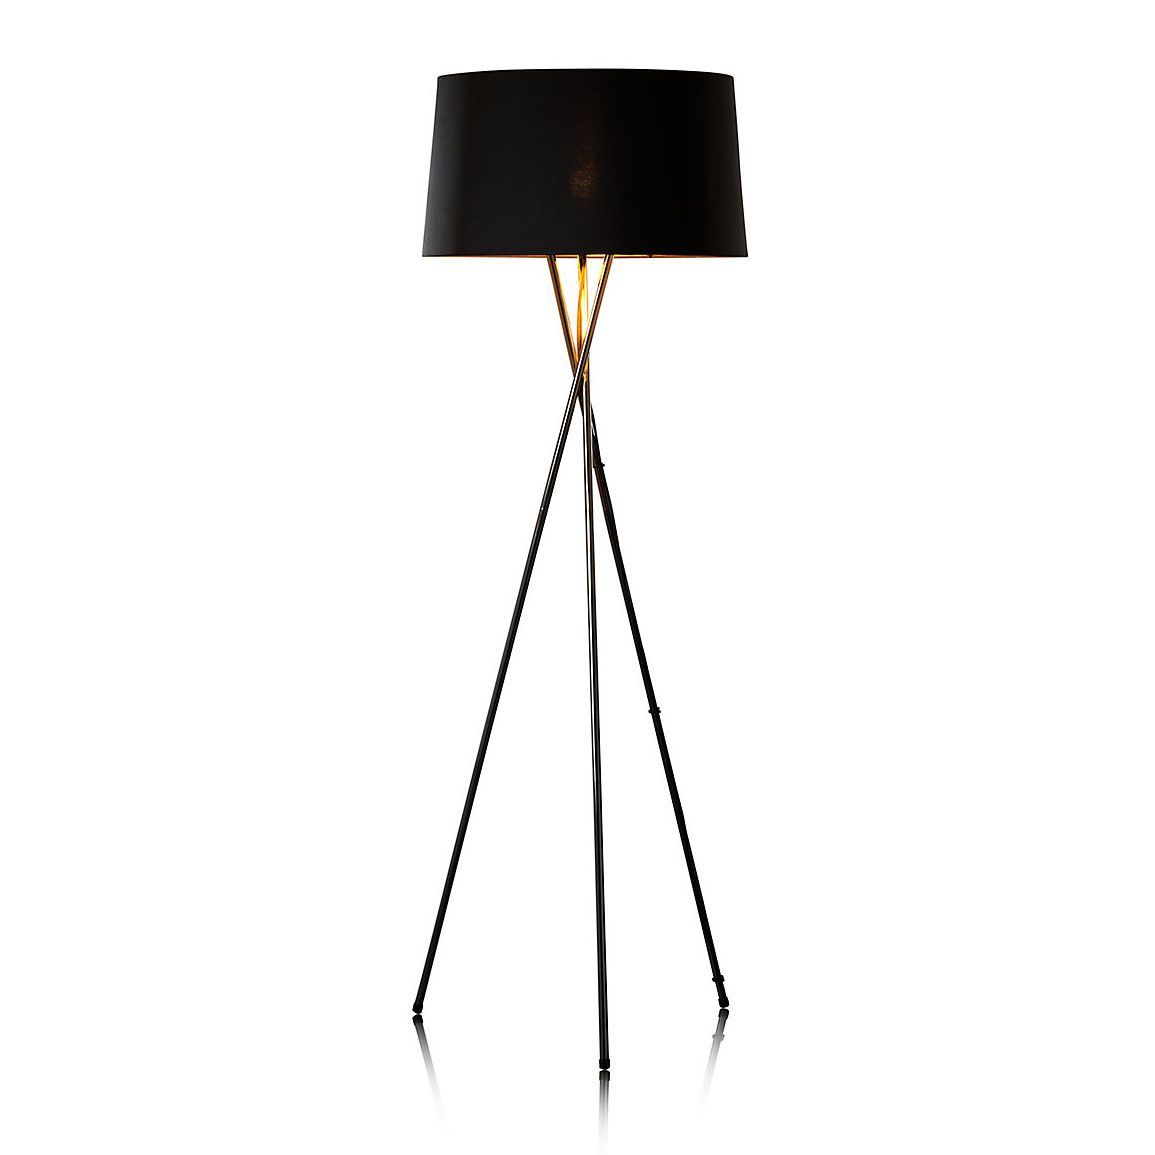 Tripod Floor Lamps Our Pick Of The Best Floor Lamp within size 1155 X 1155